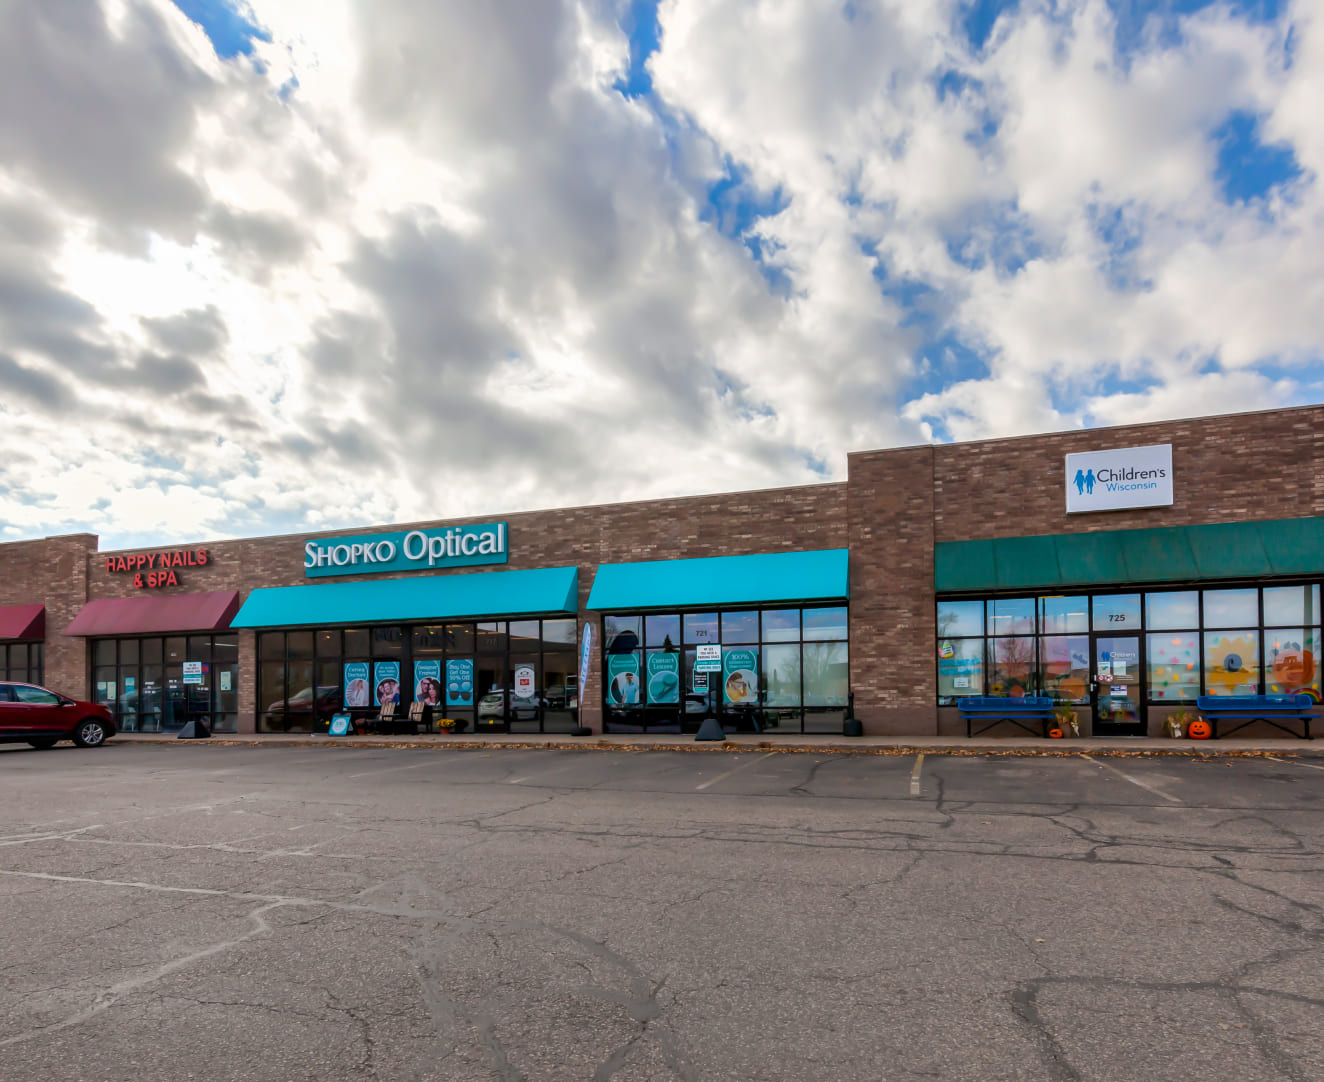 The storefronts of Happy Nails & Spa, Shopko Optical, and Children's Wisconsin at 641–725 S. Central Avenue in Marshfield, WI